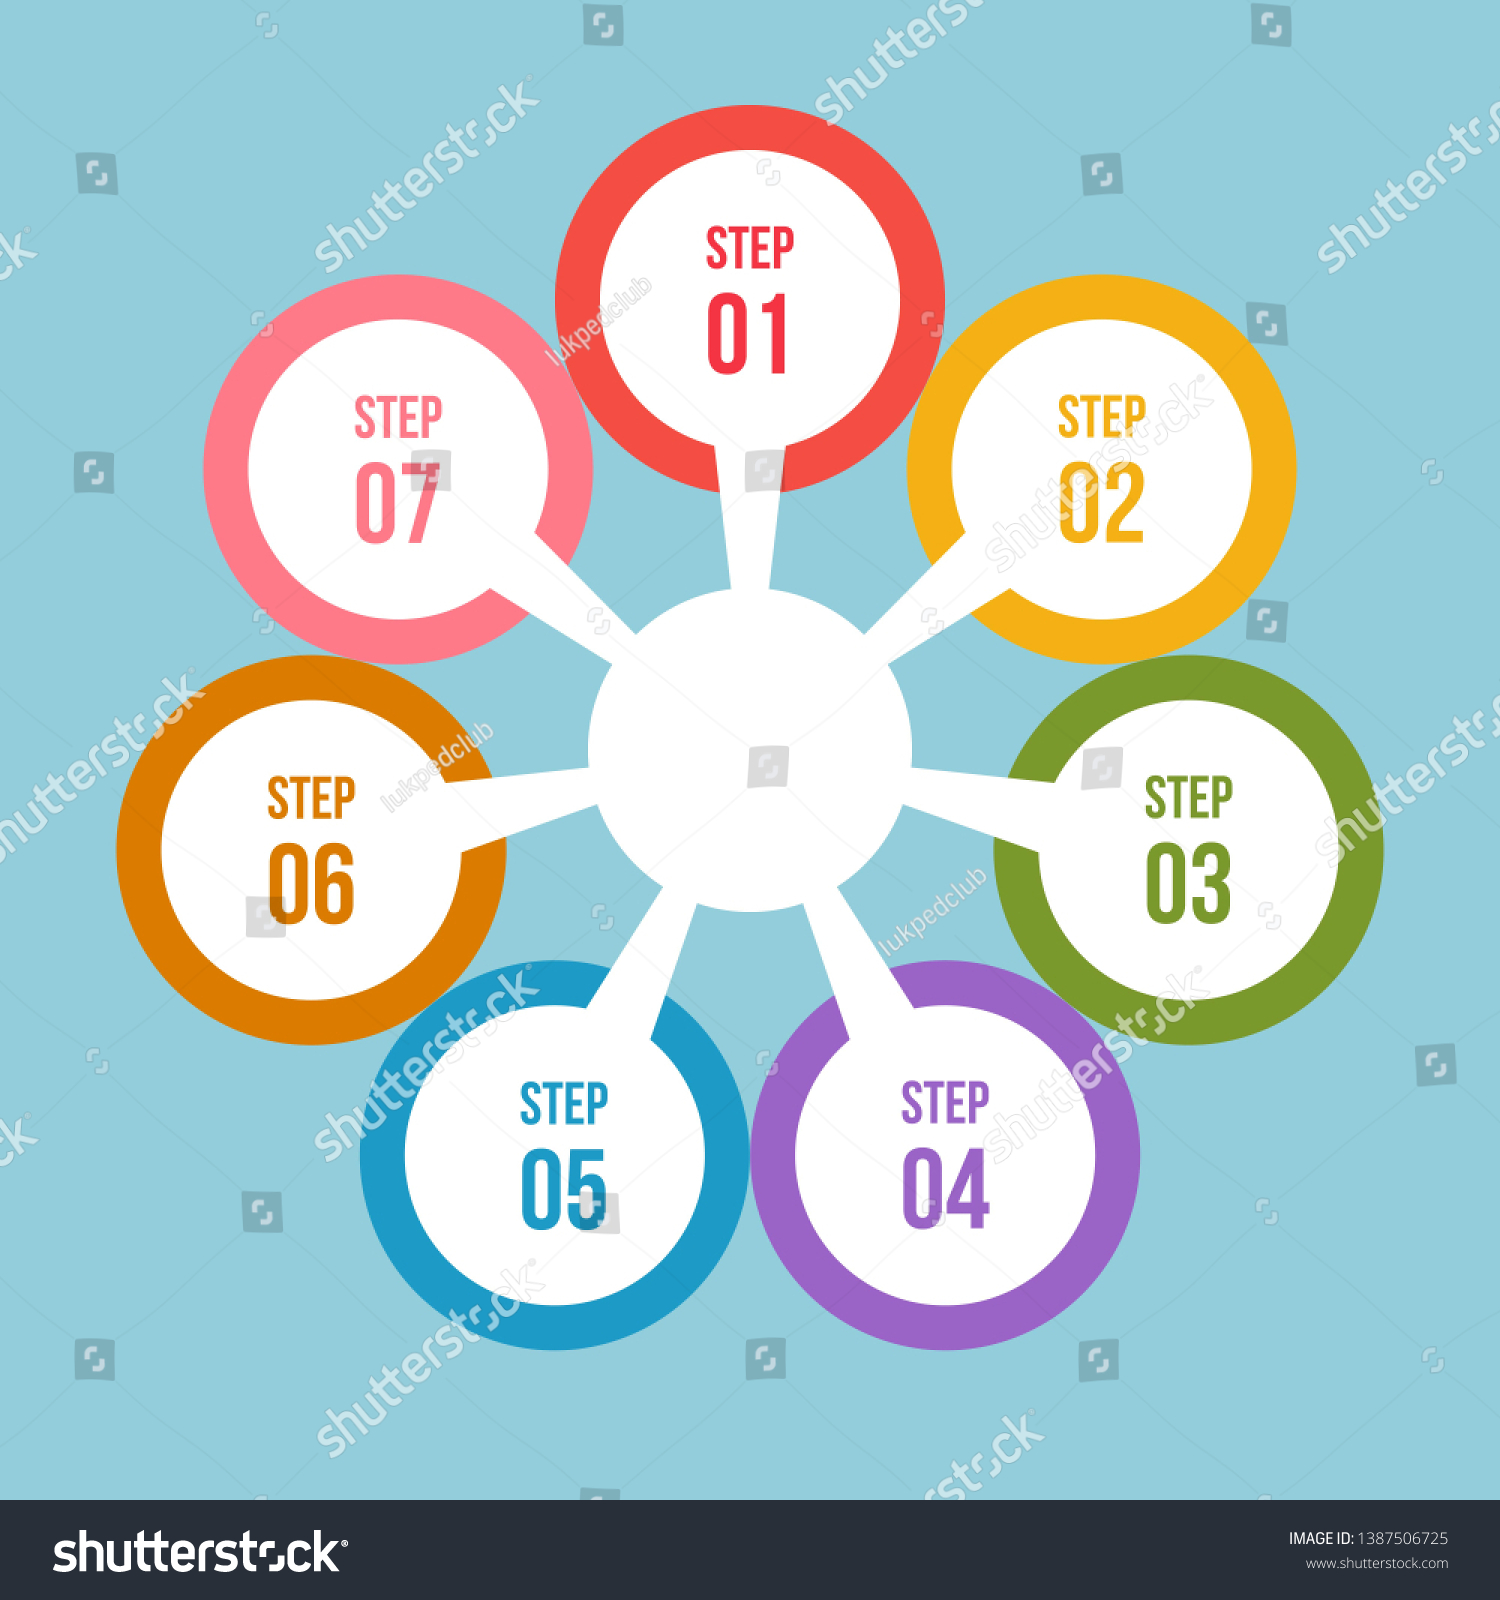 7 Steps Circle Chart Circle Infographic Stock Vector Royalty Free 1387506725 Shutterstock 3533